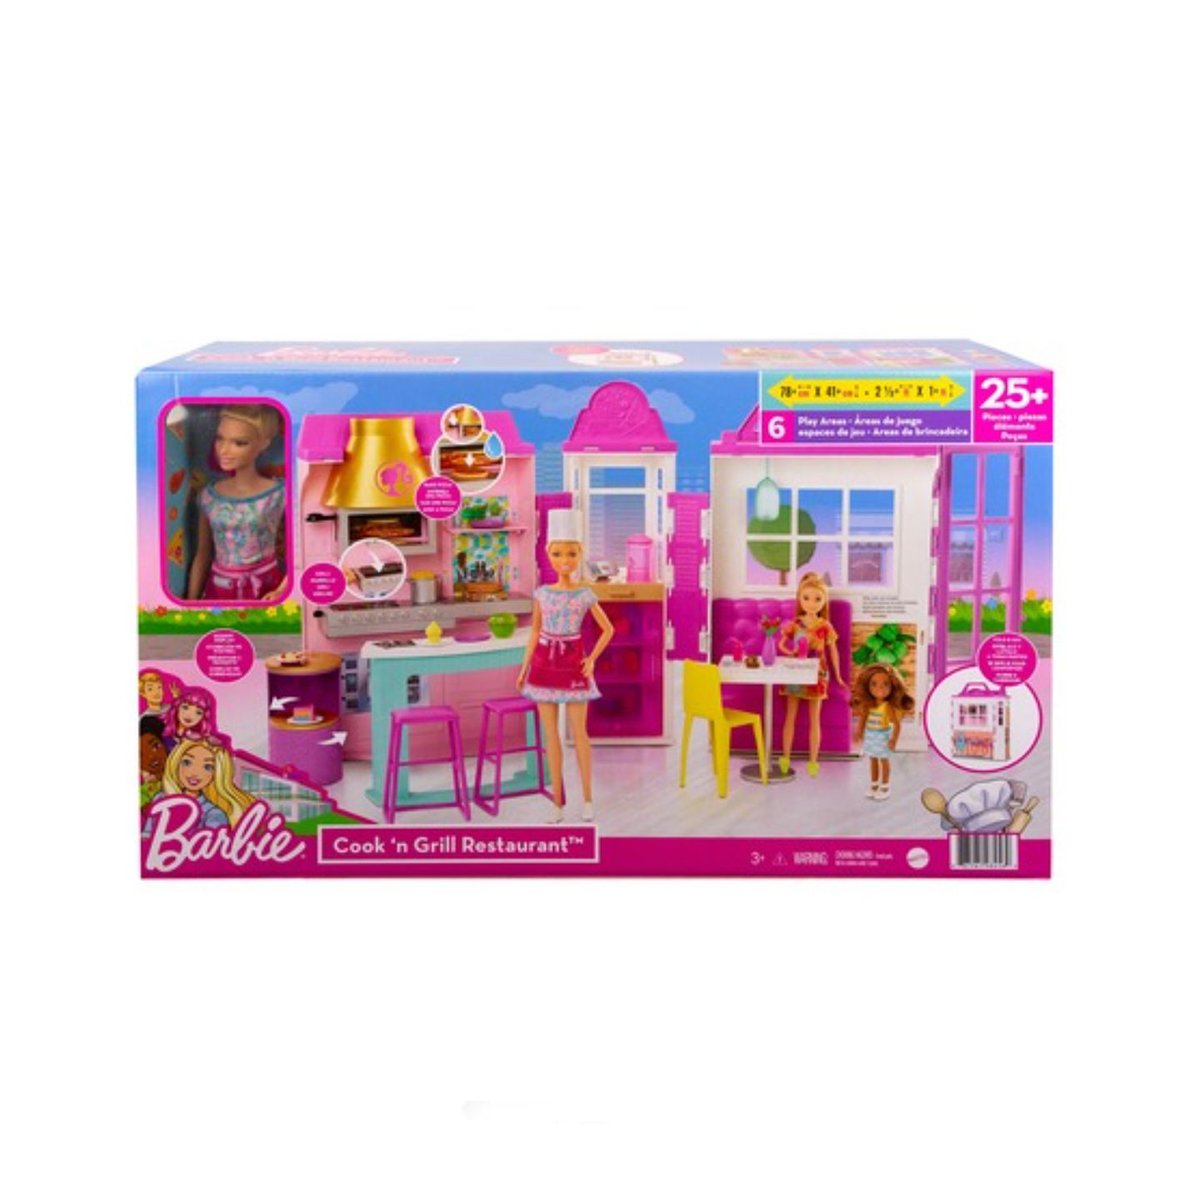 Set restaurant, Barbie, Cook and Grill Barbie